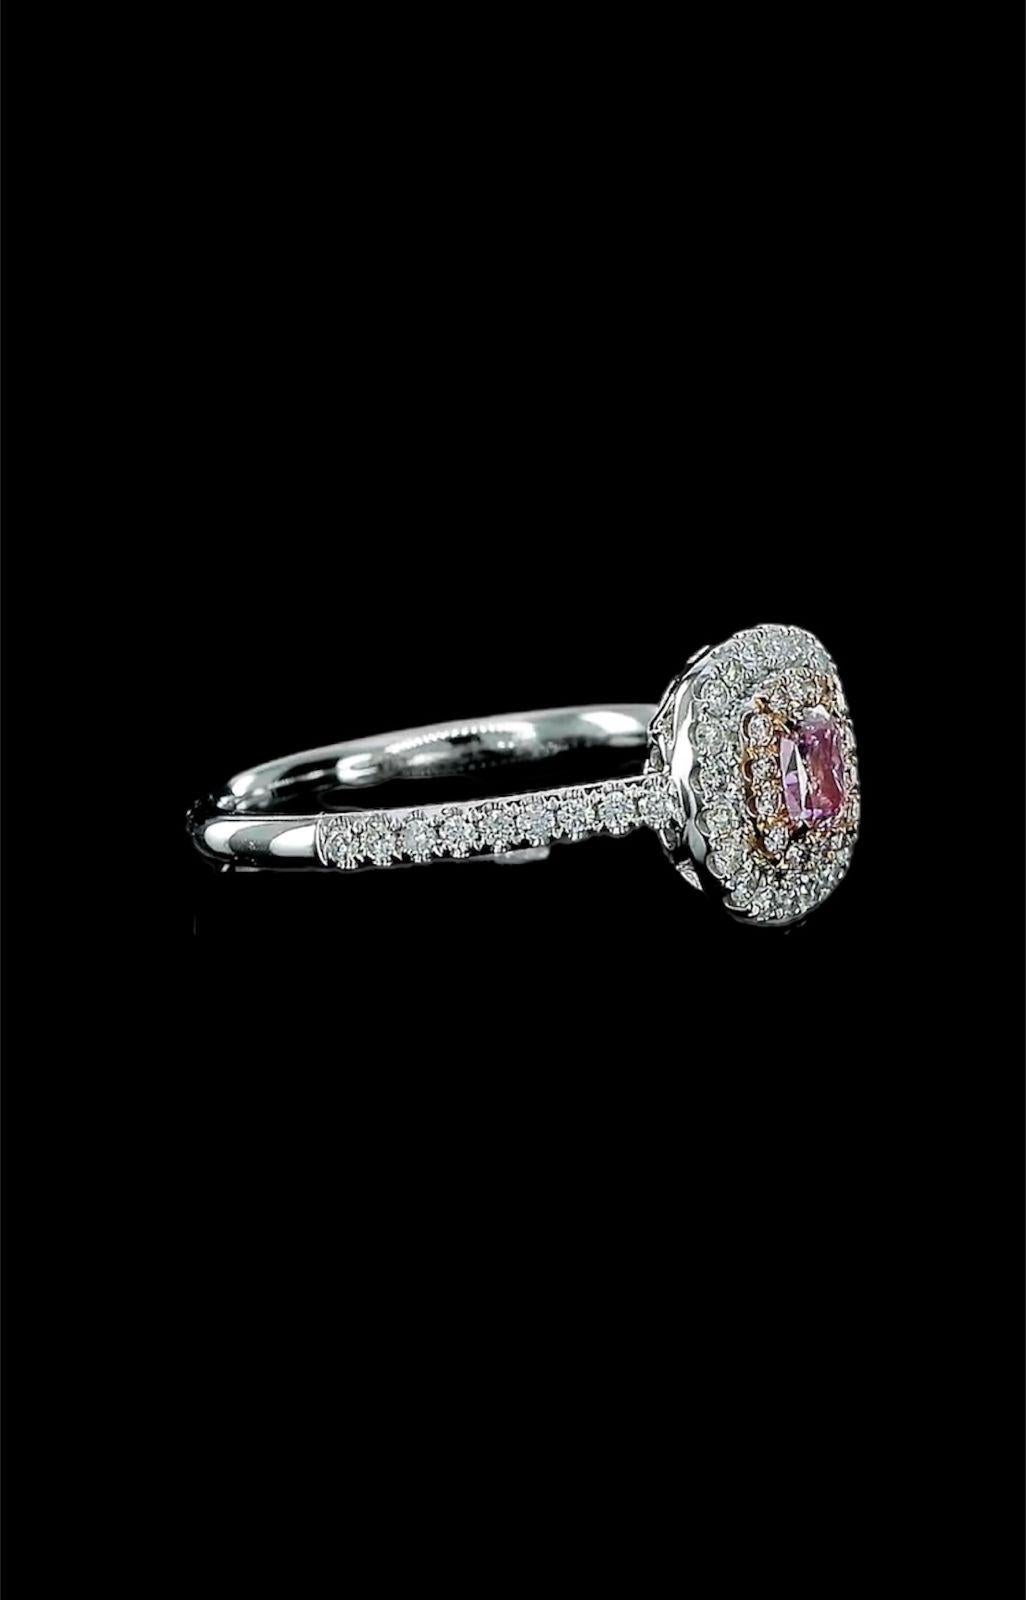 GIA Certified 0.33 Carat Faint Pink Diamond Ring SI2 Clarity For Sale 2